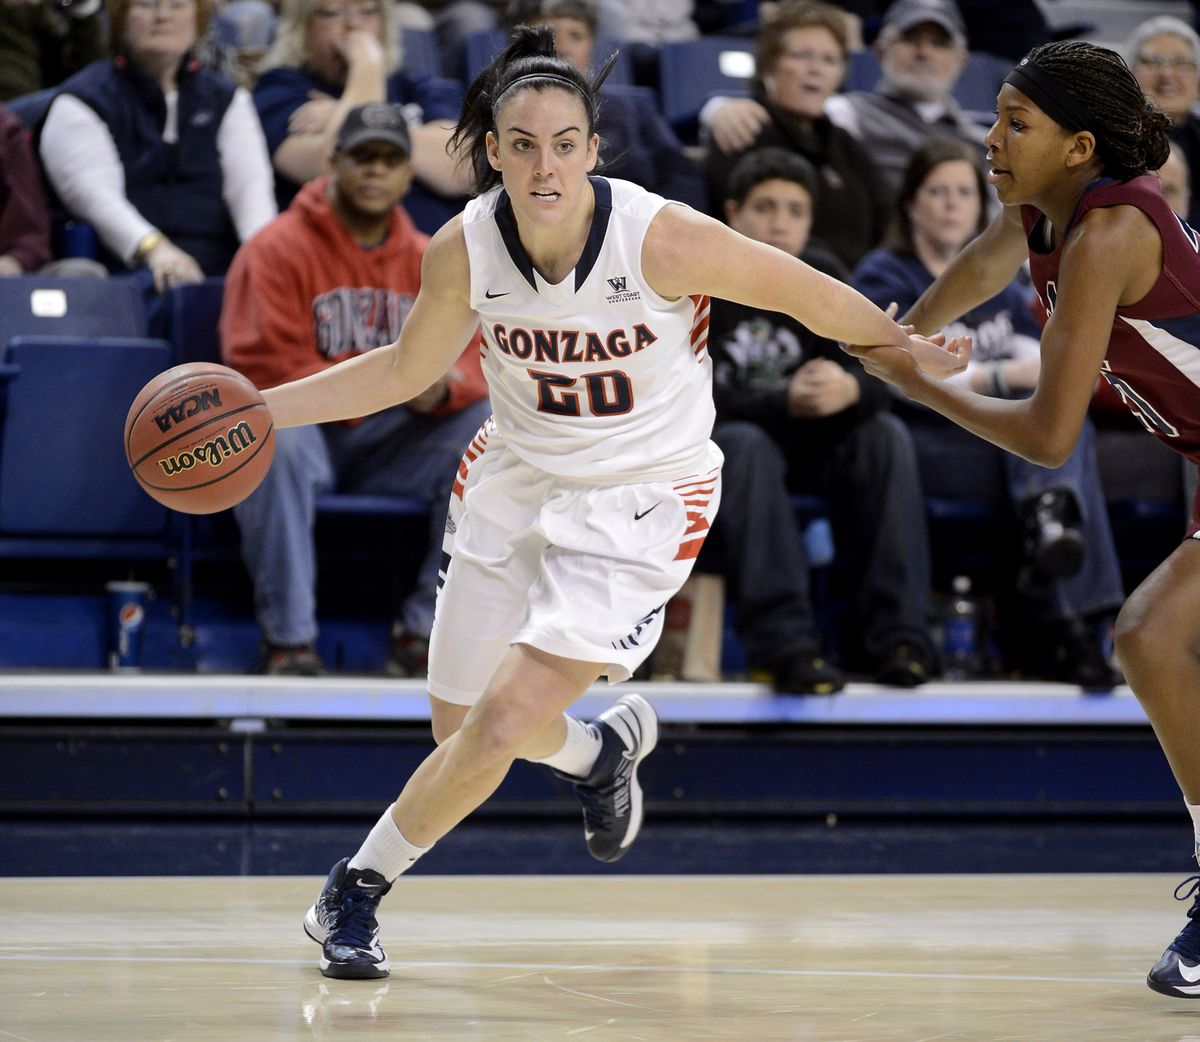 Gonzaga senior guard Meghan Winters is the last remaining player from the program’s first Sweet 16 team in 2009-10. (Colin Mulvany)